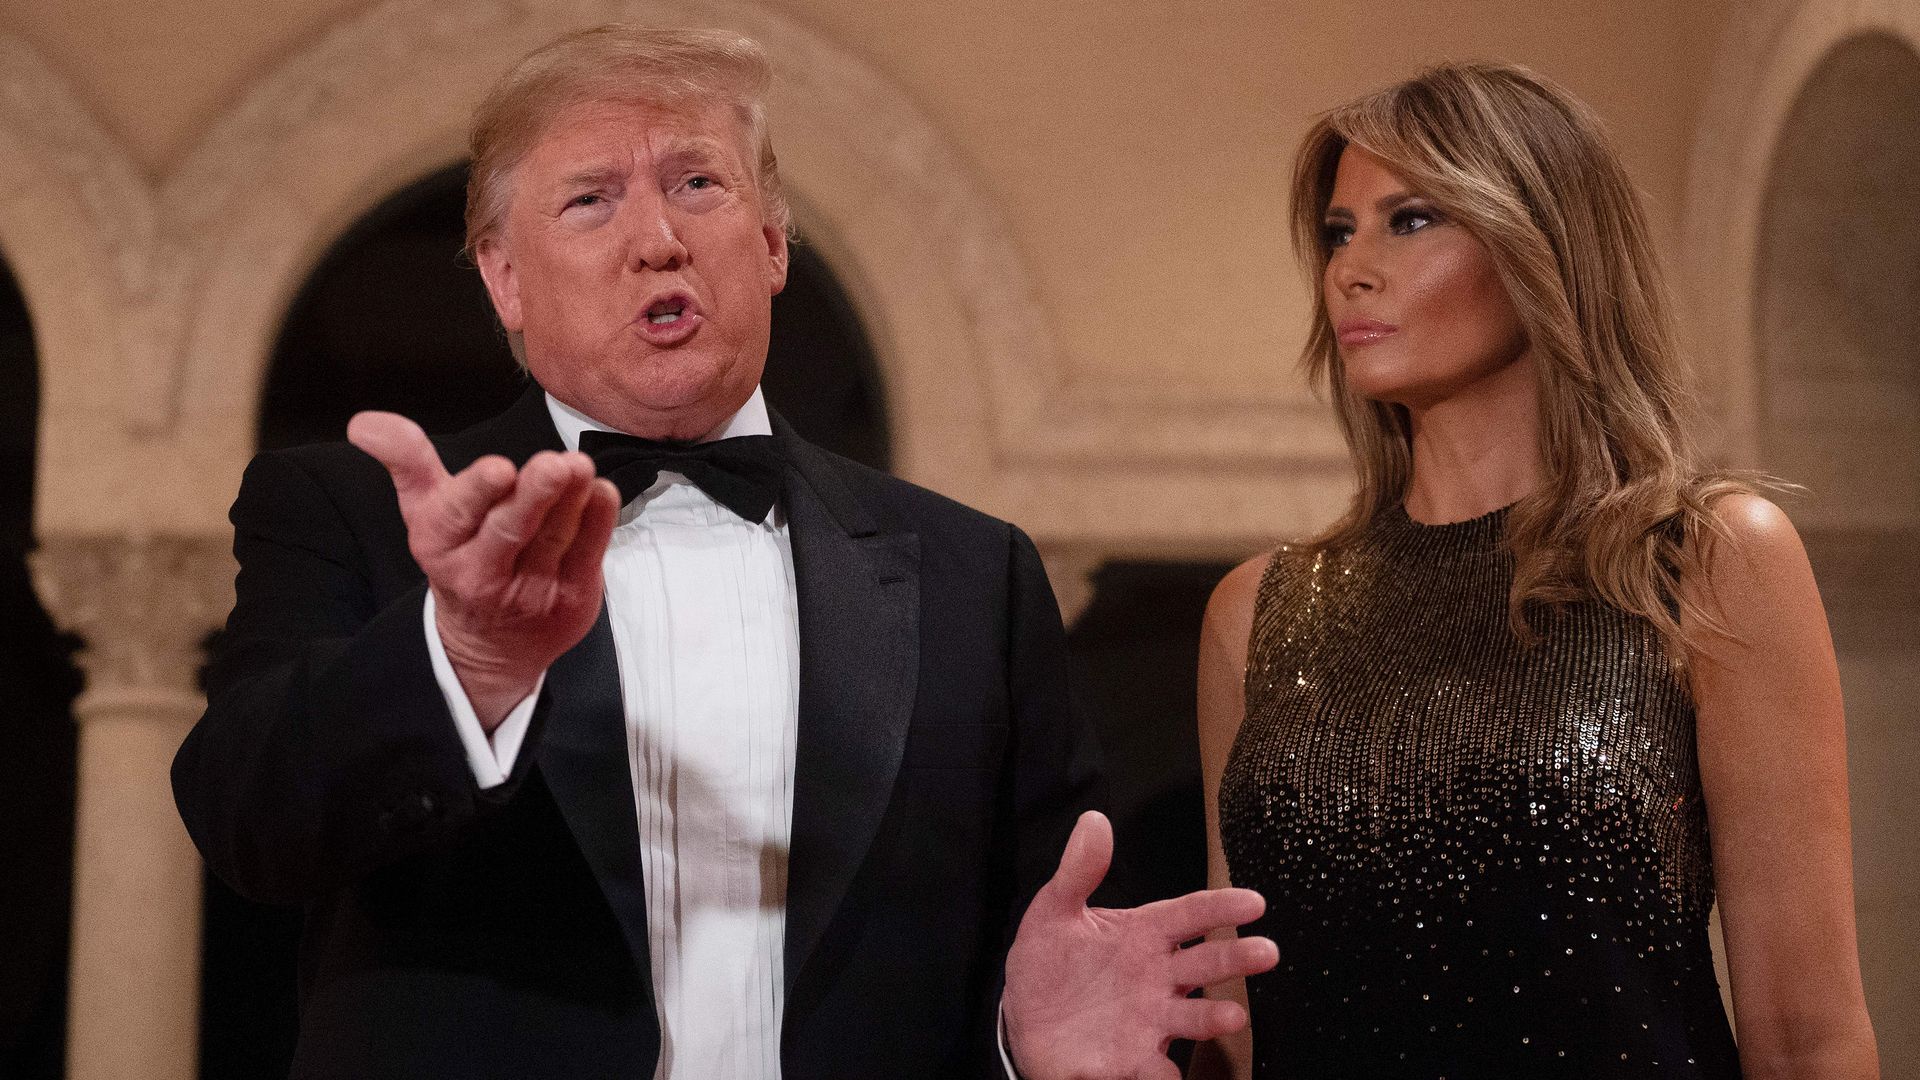 President Donald Trump and First Lady Melania Trump speak to the press outside the grand ballroom as they arrive for a New Year's celebration at Mar-a-Lago in Palm Beach, Florida, on December 31